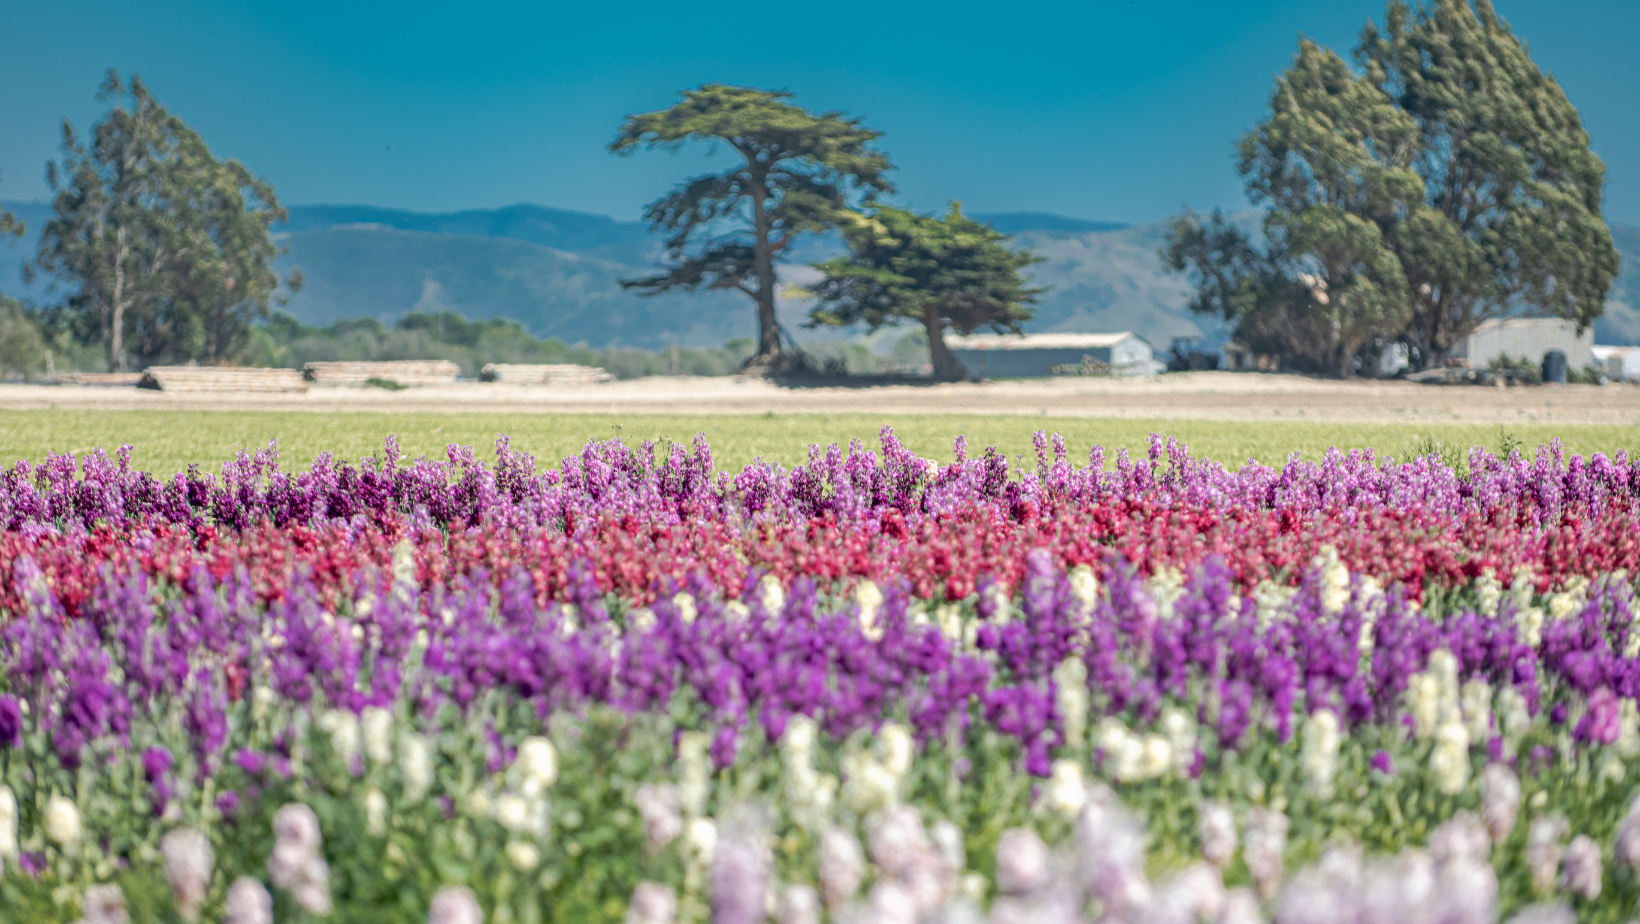 Spring Blossoms, Wellness, and Adventure in California Central Coast